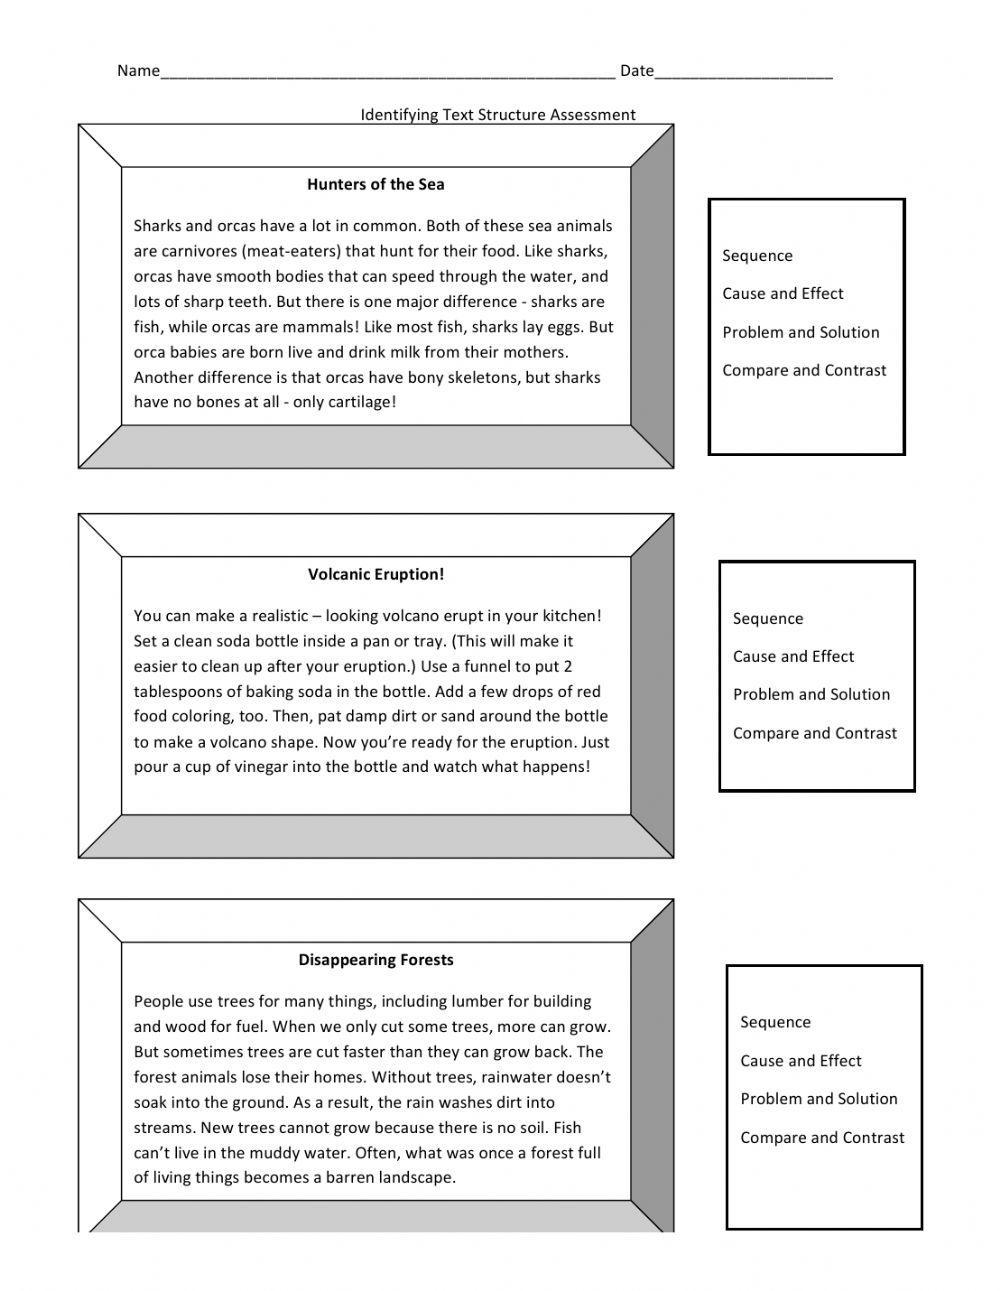 Text Structure Assessment